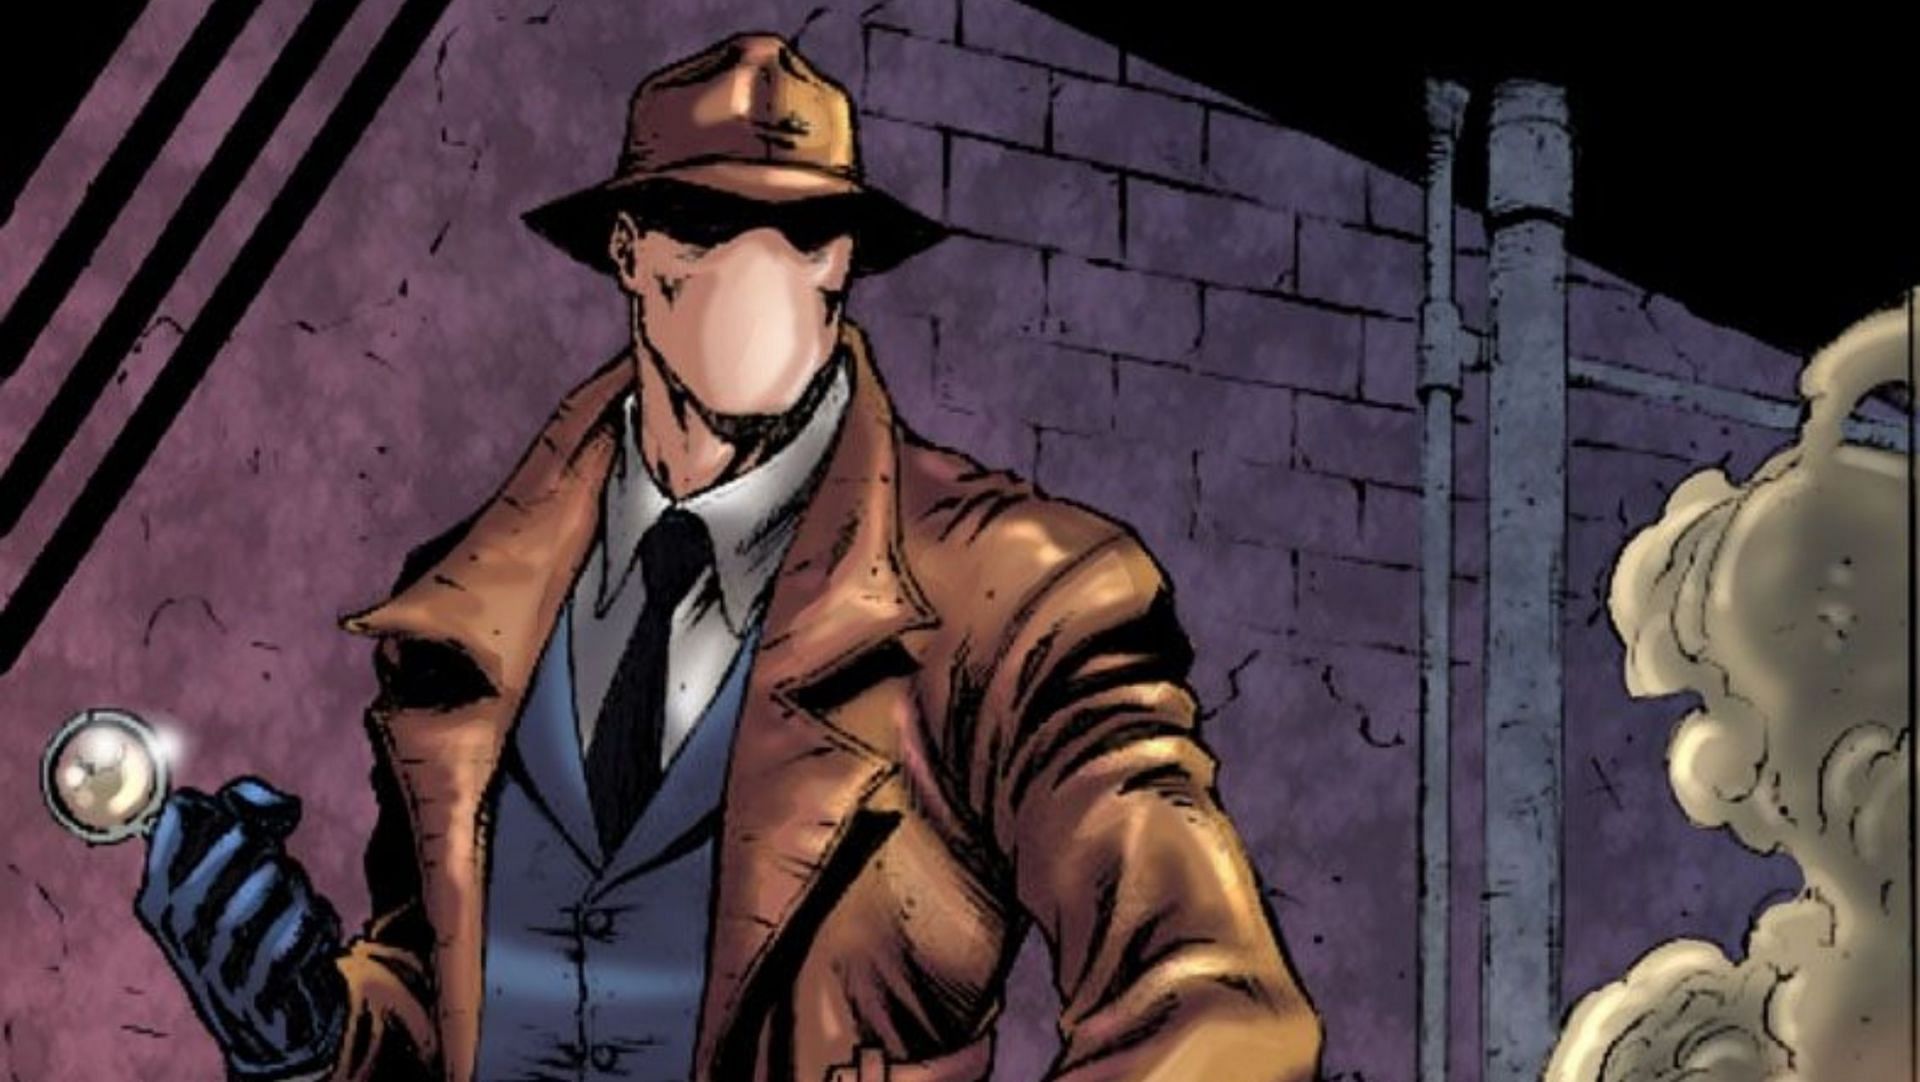 The Question, the faceless detective from DC Comics, ponders the mysteries of the world in his trench coat and fedora (Image via DC Comics)